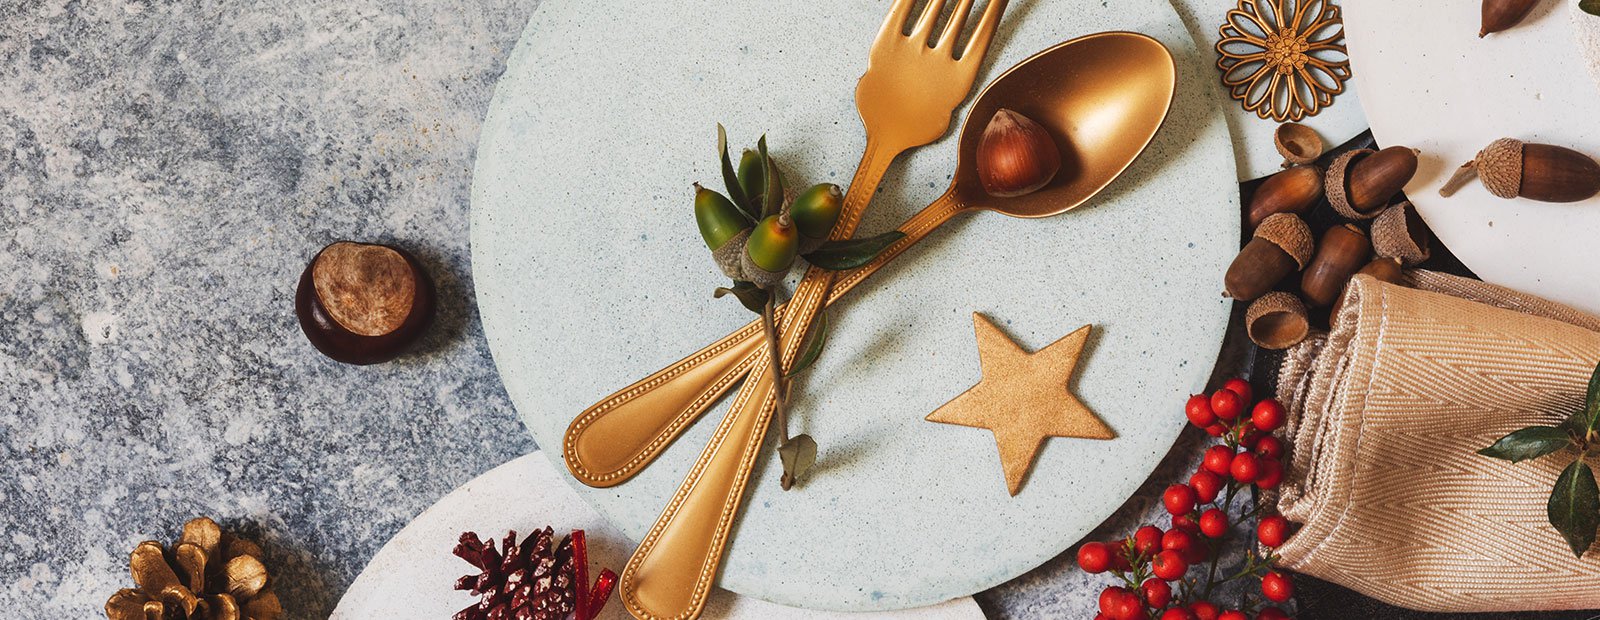 A sustainable Christmas: tips for a waste-free Christmas table